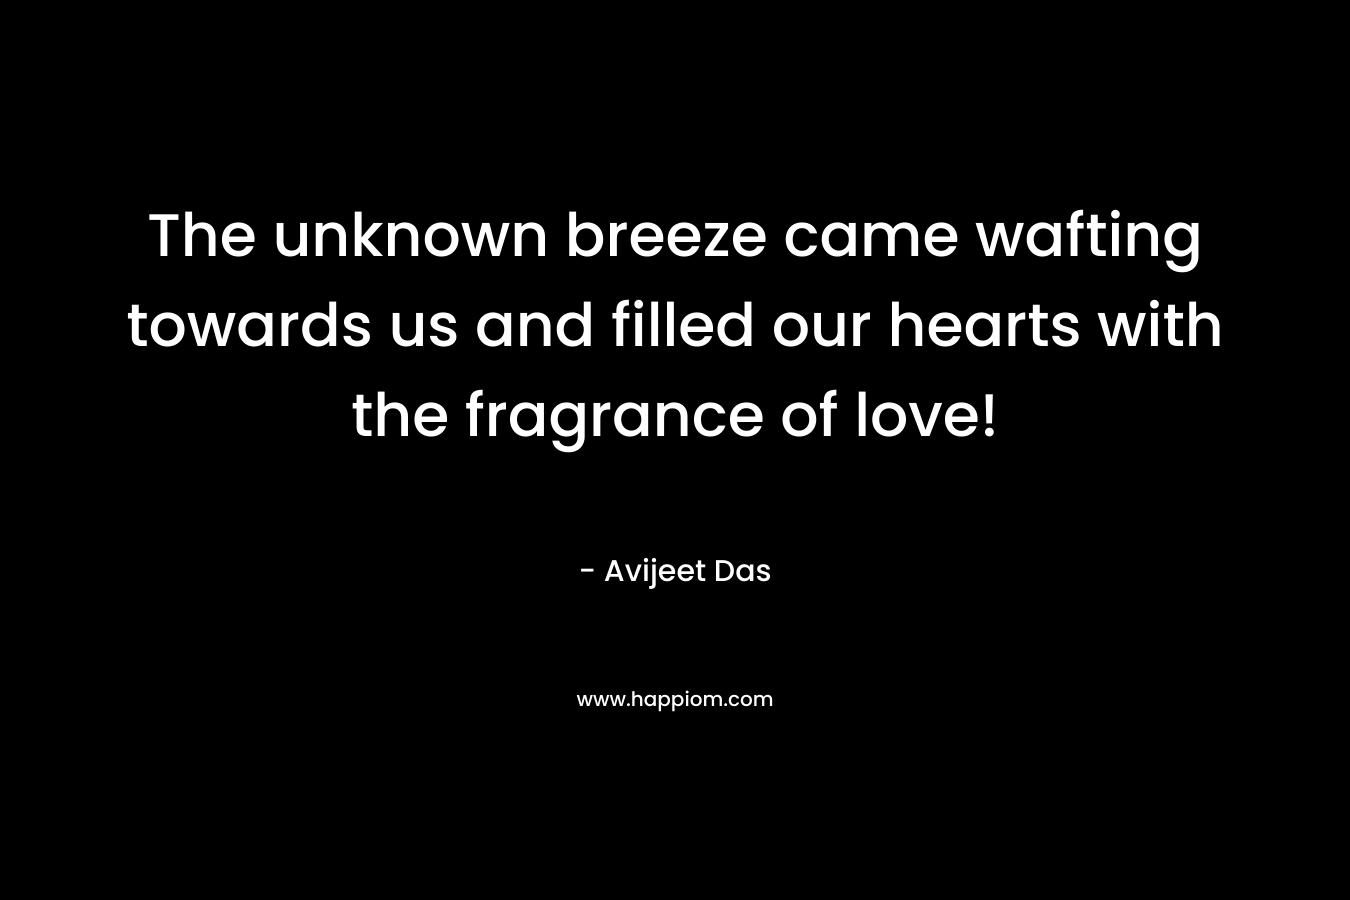 The unknown breeze came wafting towards us and filled our hearts with the fragrance of love!